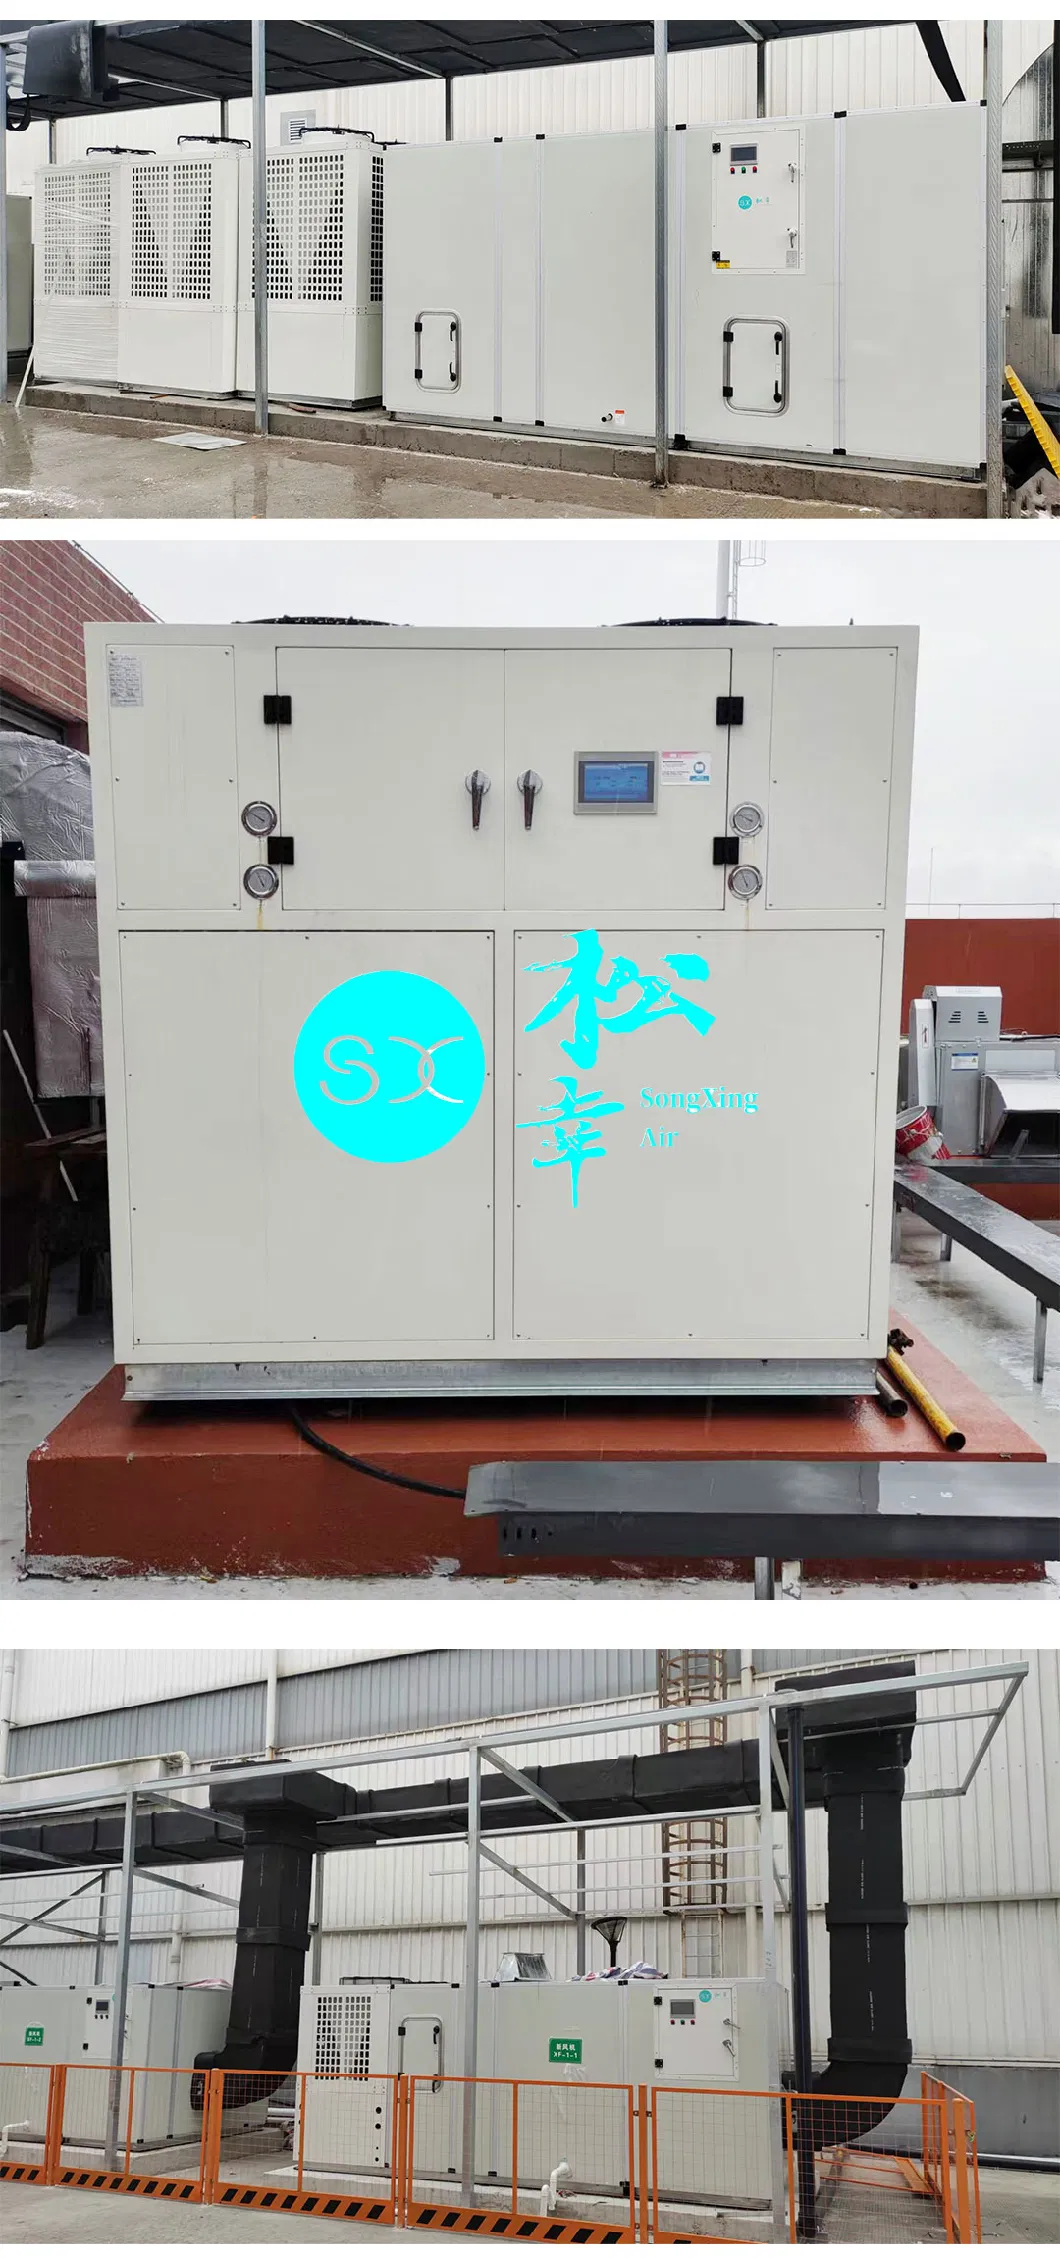 Sxwd800r Industrial Dehumidifier Rooftop Air Conditioner Direct Expansion Air Handling Unit